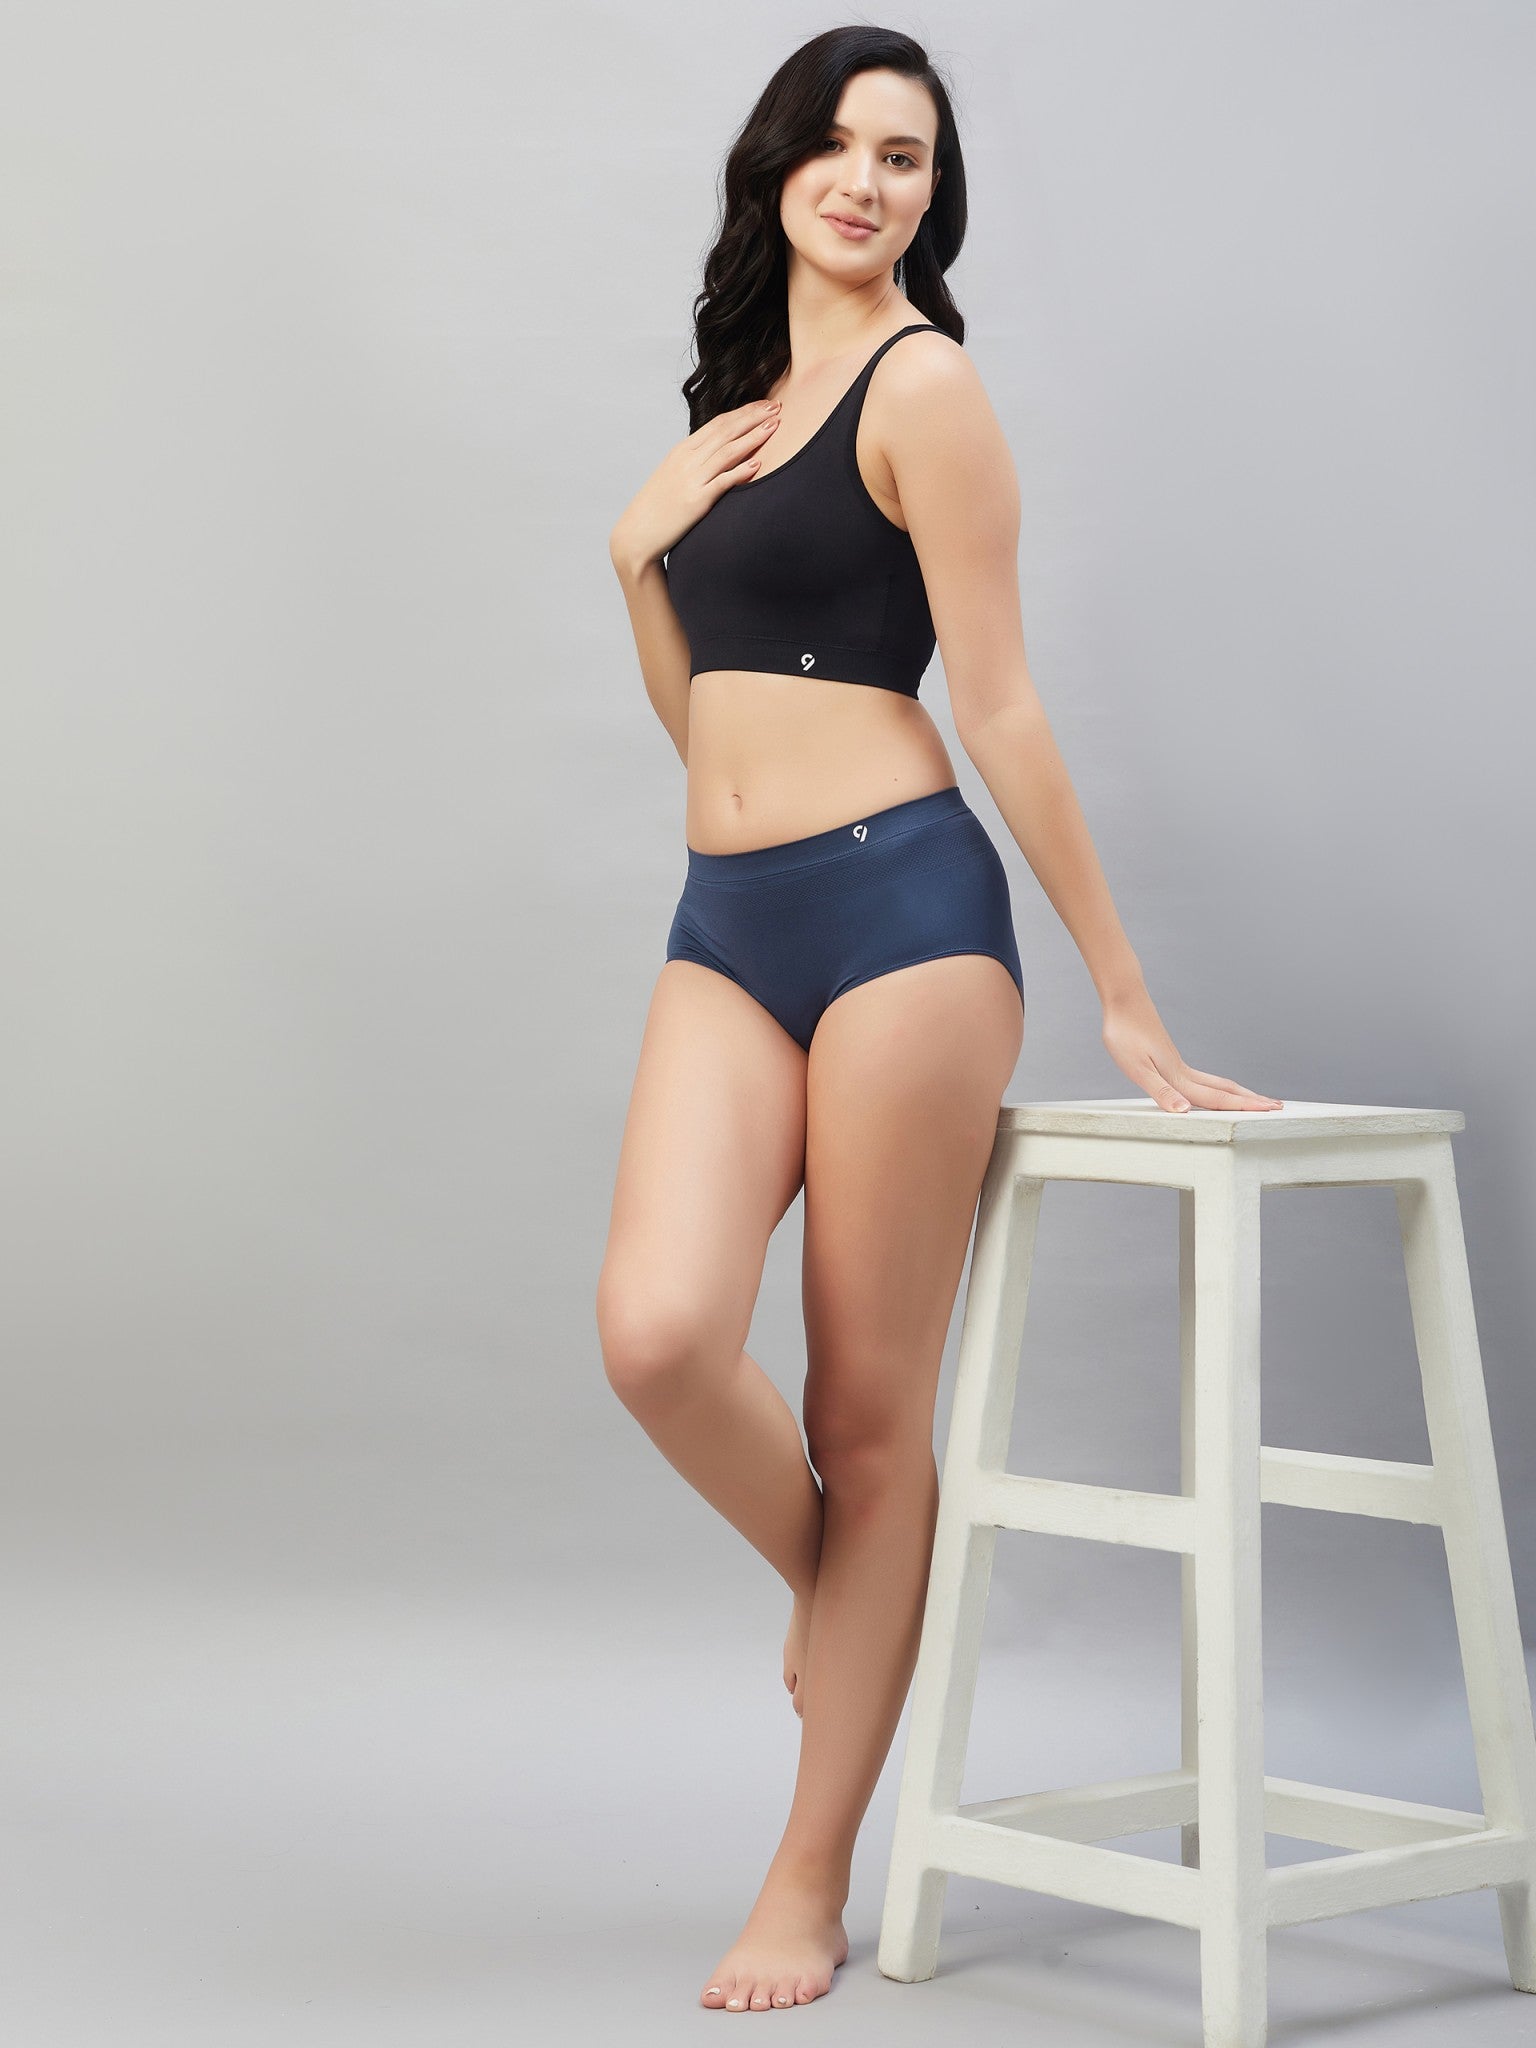 Shop Stylish Women's Hipster Panties for Ultimate Comfort – C9 Airwear